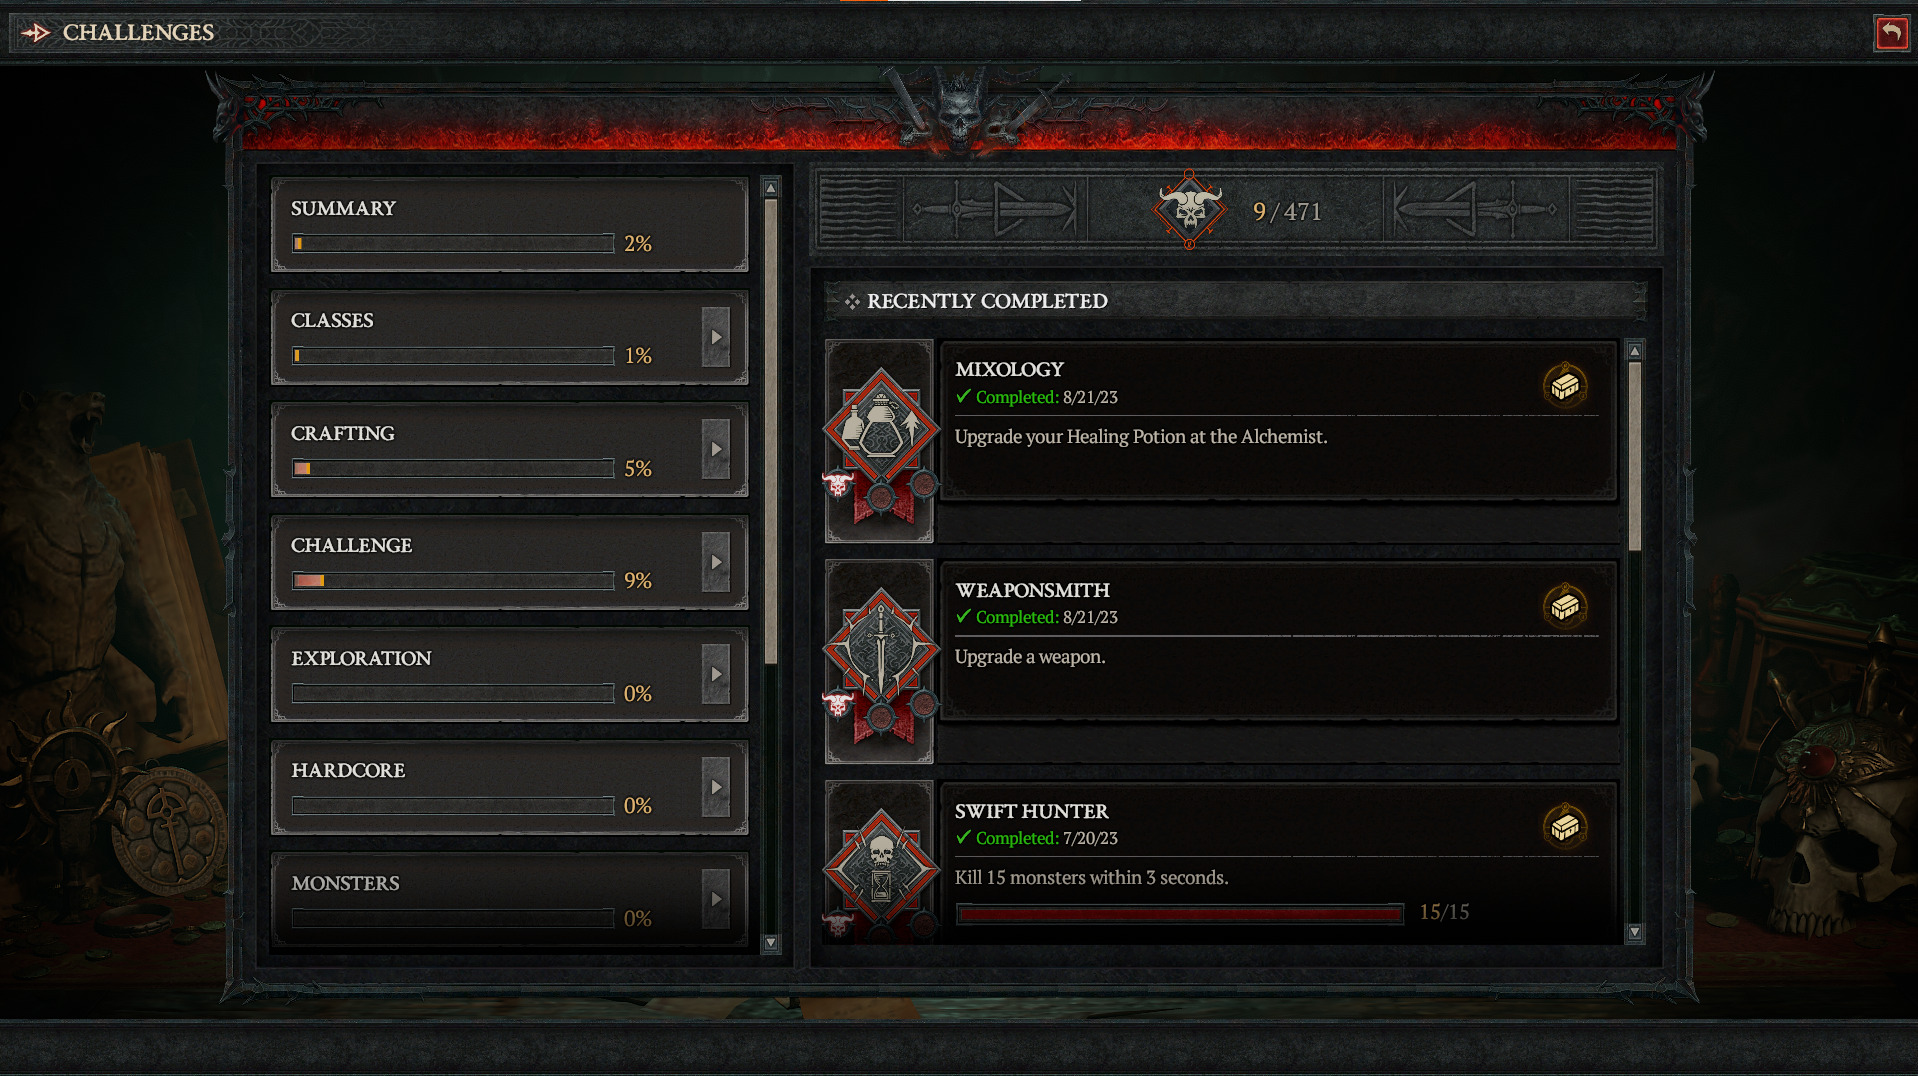 A screenshot showing the challenges screen in Diablo 4